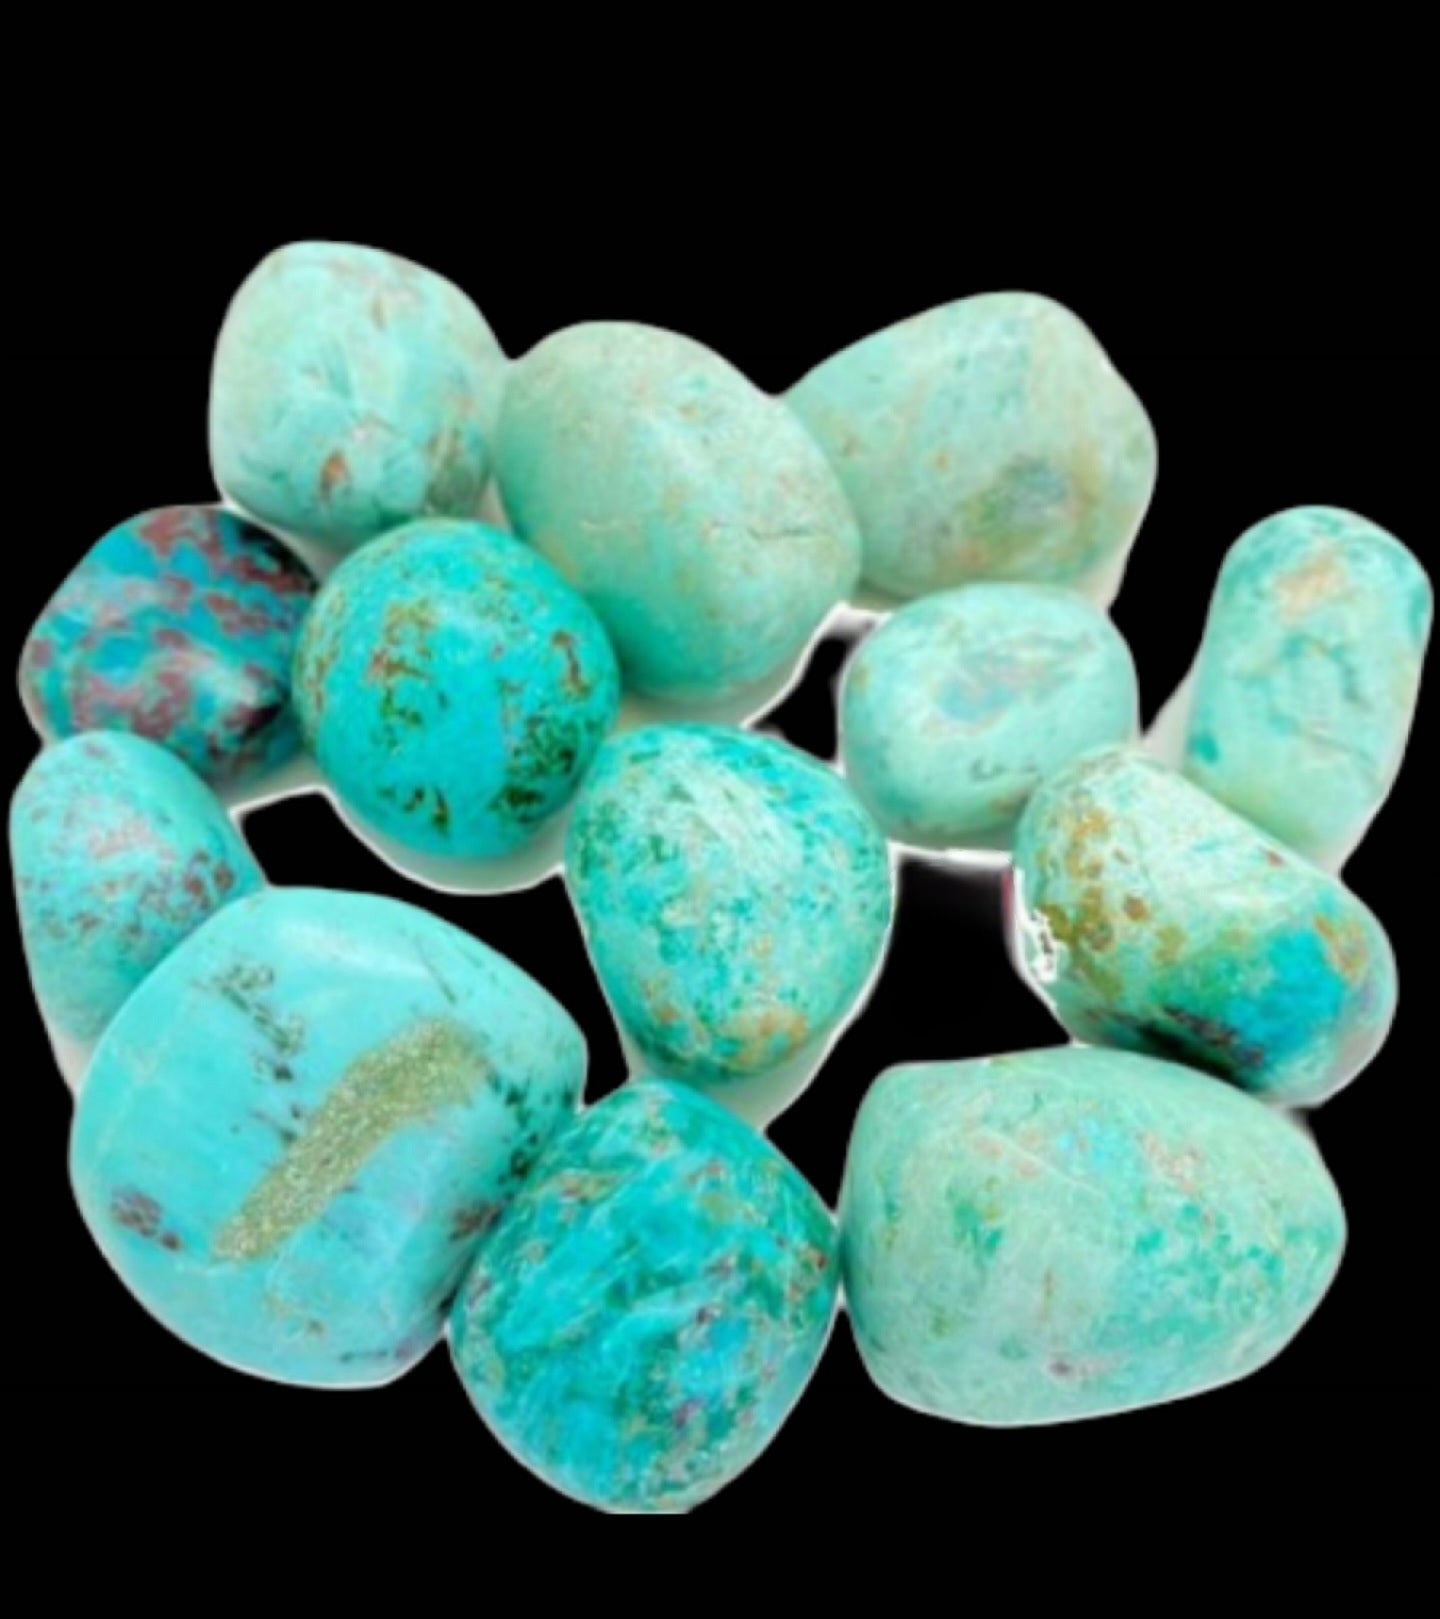 Turquoise Polished Tumbles from Peru!  Beautiful and Full of Wisdom!